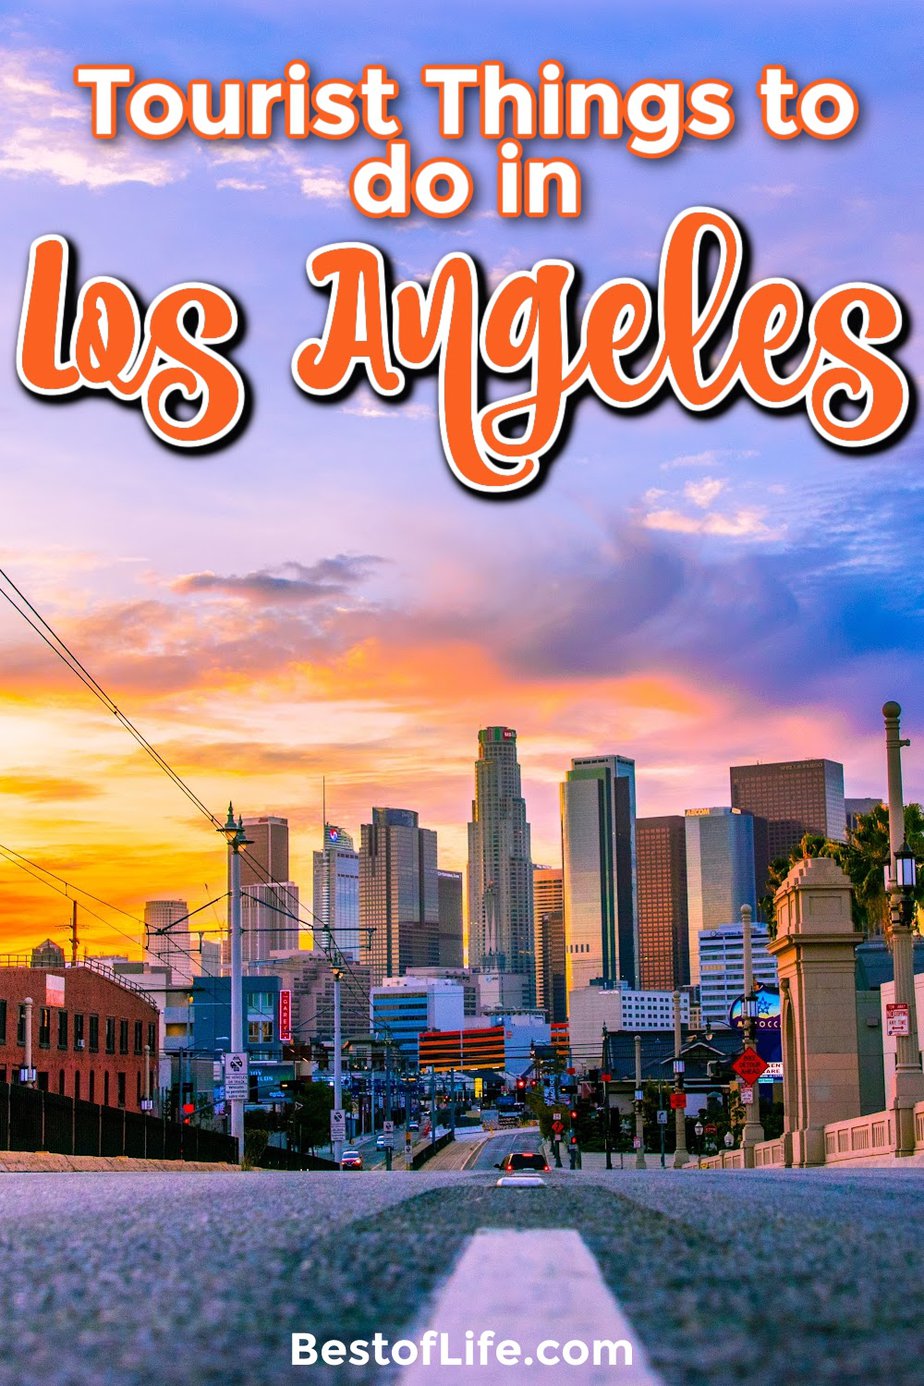 There are many tourist things to do in LA that gives the city life, gives the locals things to do, and make visitors feel like they’re center stage. Best Things to do in LA | Best Tourist Activities in LA | What to do in LA | California Travel Tips | Things to do in California | Things to do in SoCal | SoCal Travel Tips #california #traveltips